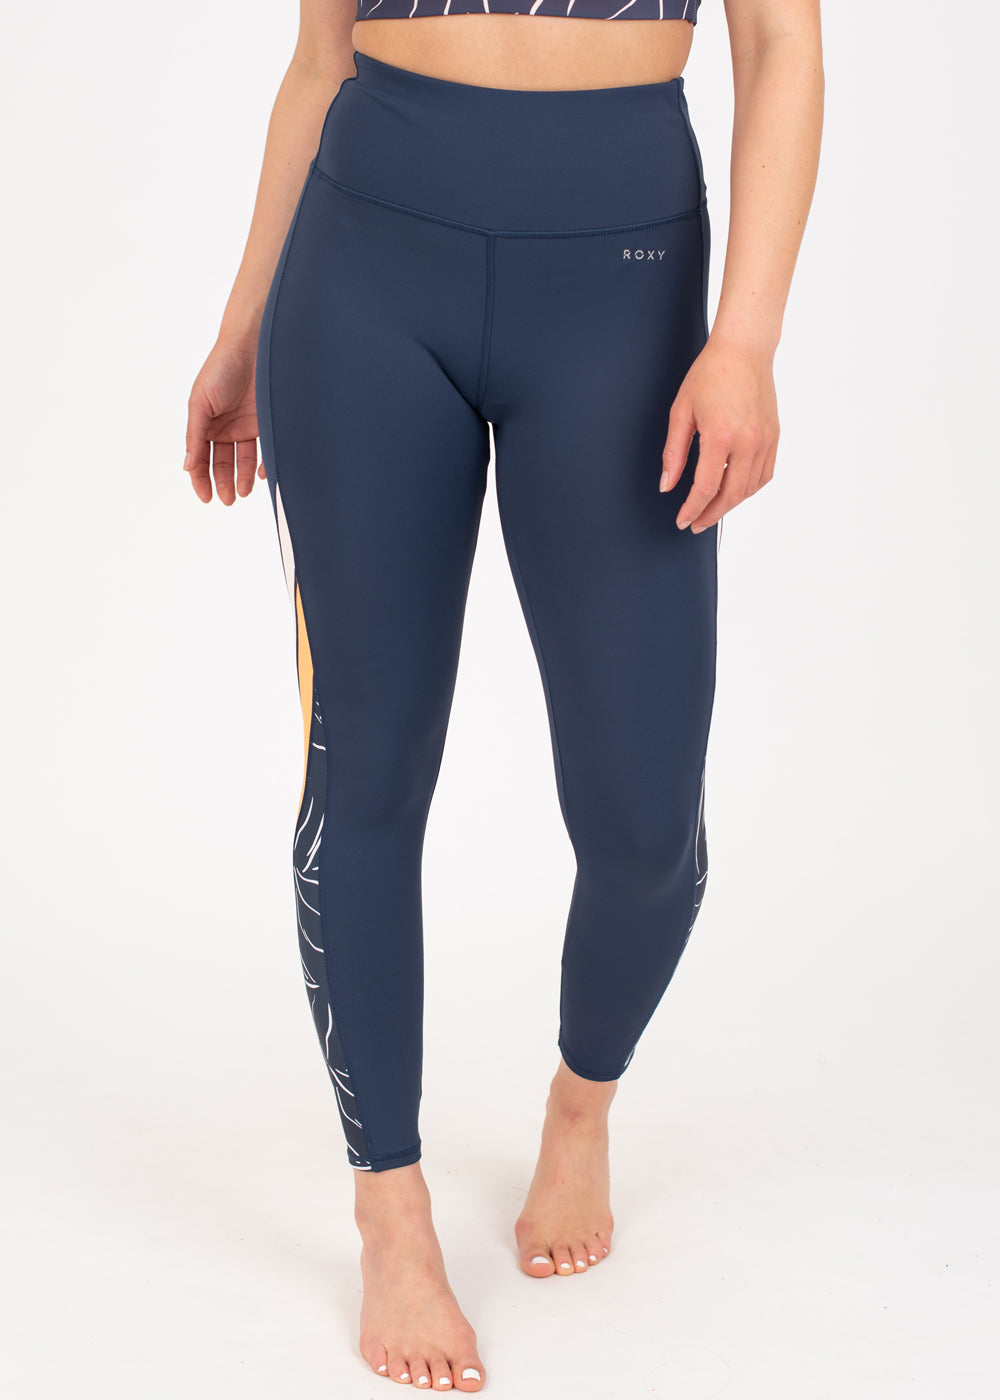 Shalala Love Fitness Leggings by Roxy – The Beach Boutique